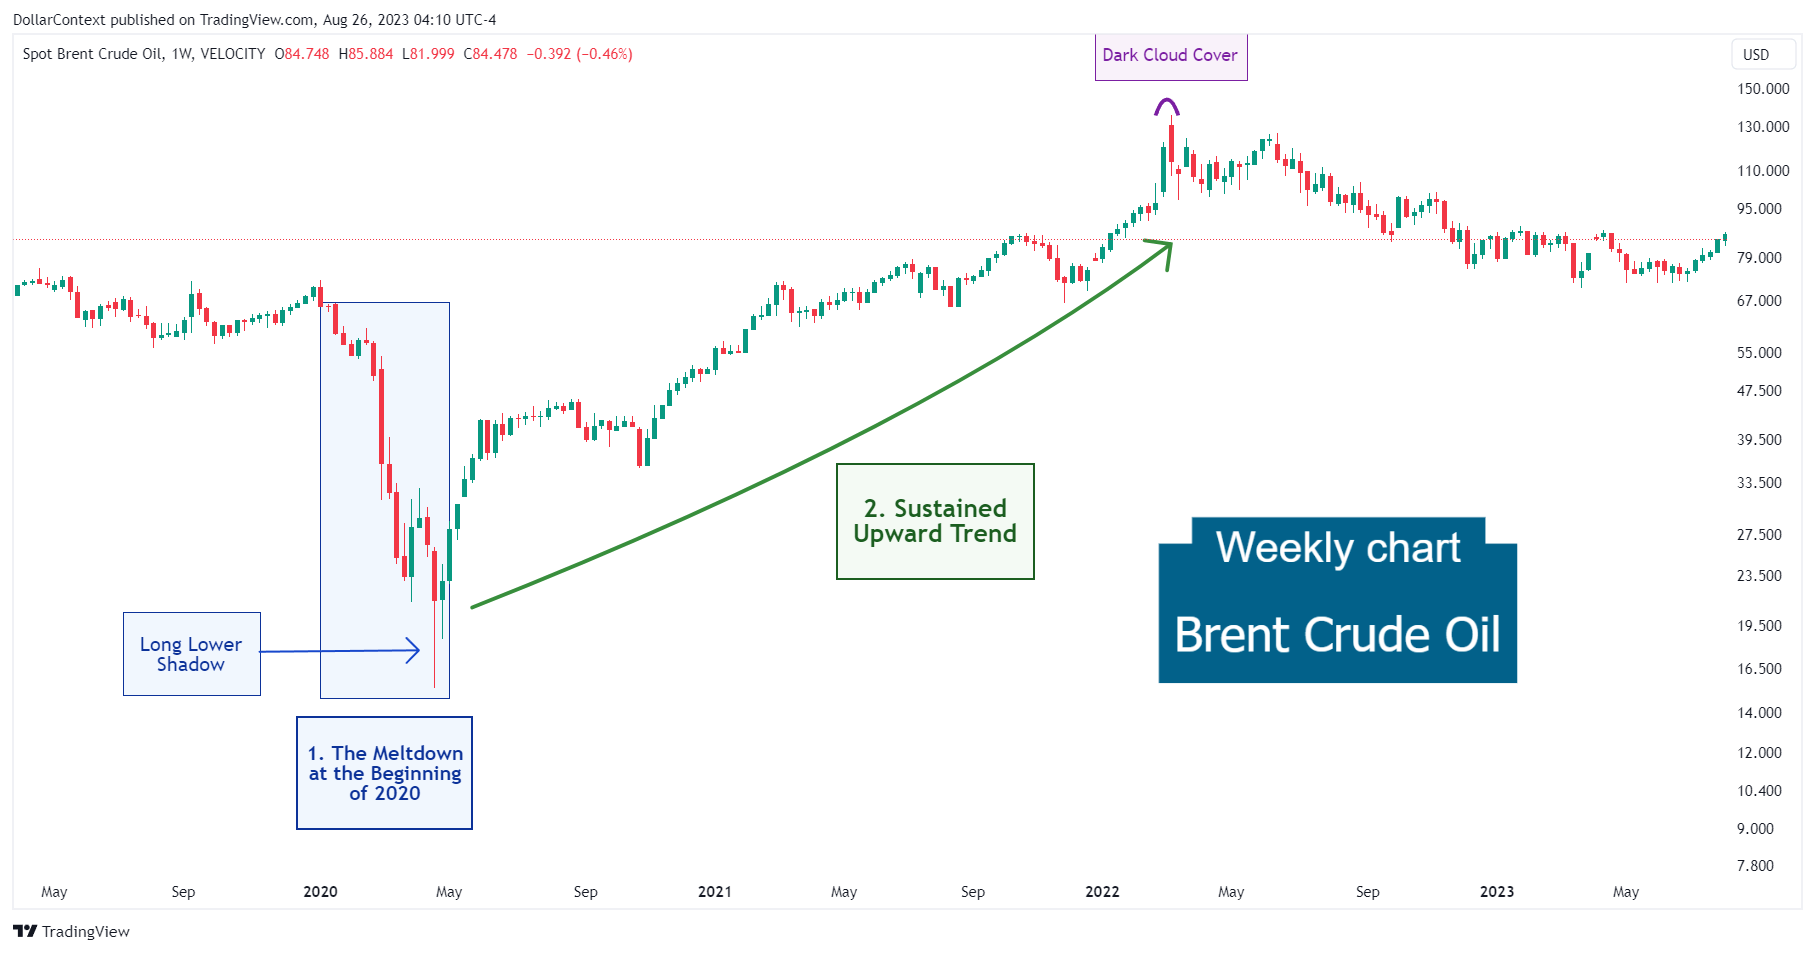 Brent Crude Oil: The Uptrend After the Pandemic